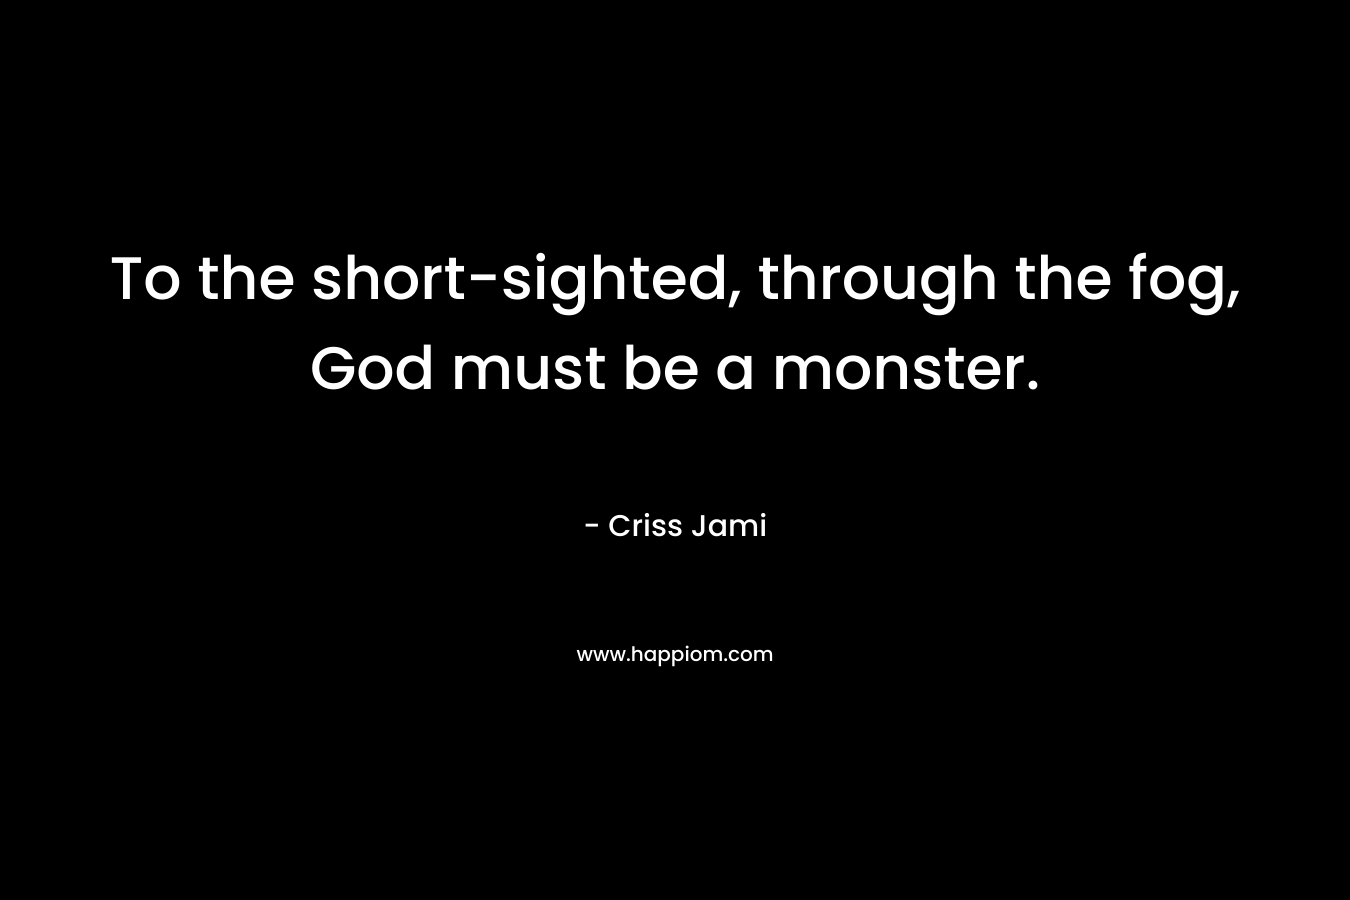 To the short-sighted, through the fog, God must be a monster.